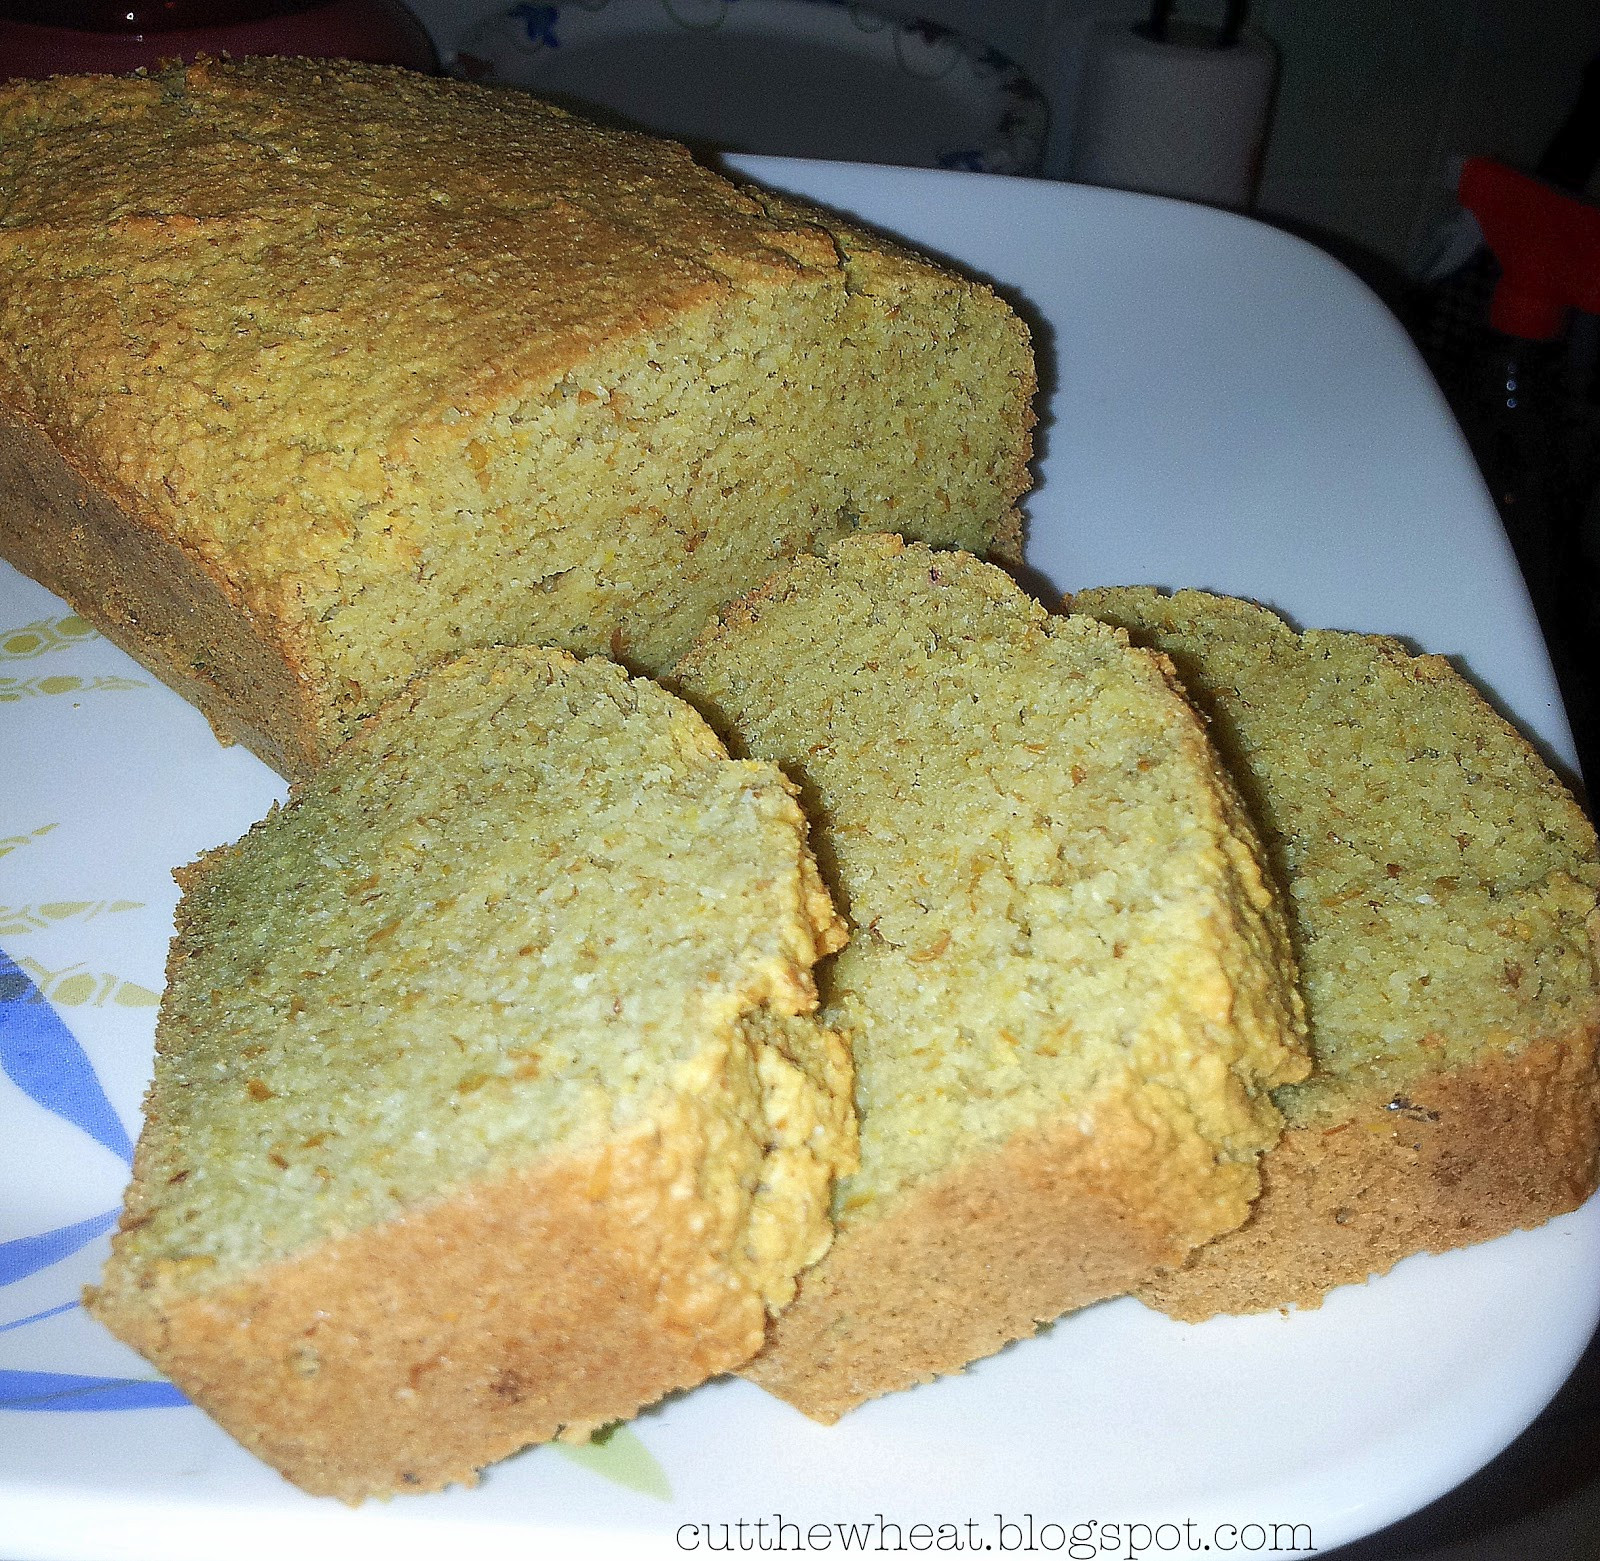 Gluten Free Low Carb Bread
 Wheat Free Low Carb Gluten Free Bread